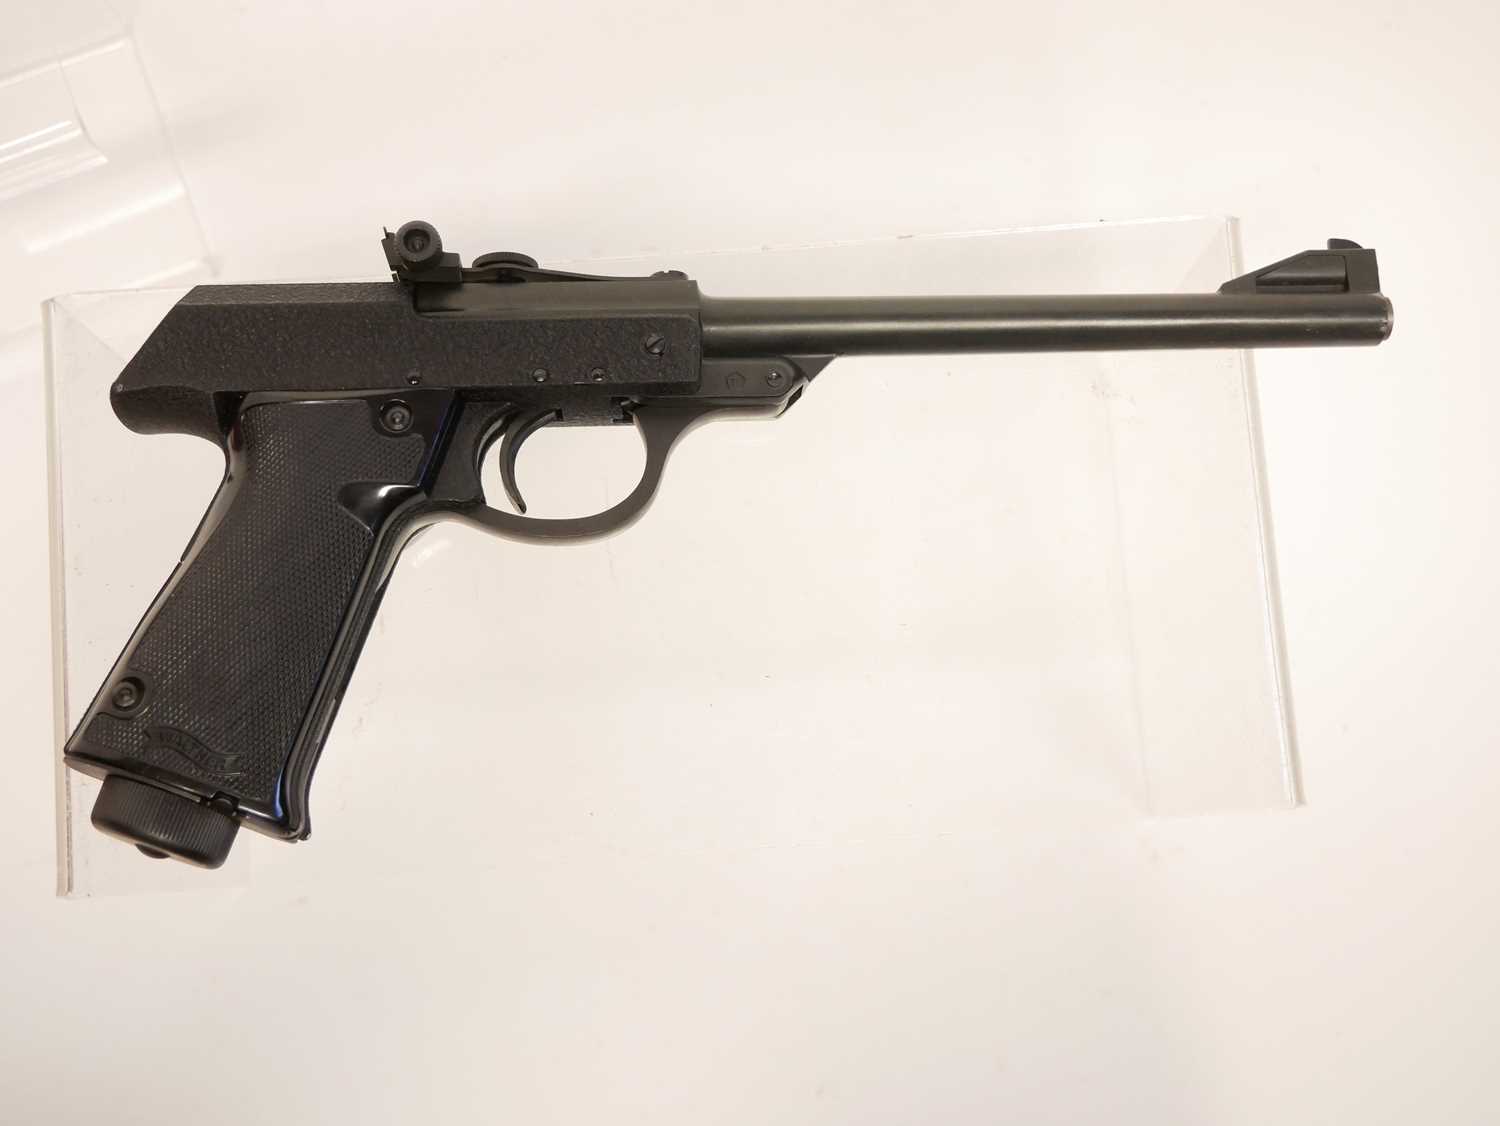 Boxed Walther .177 Model LP.53 air pistol (Luftpistole), 9.5inch barrel, serial number 118326, - Image 2 of 12